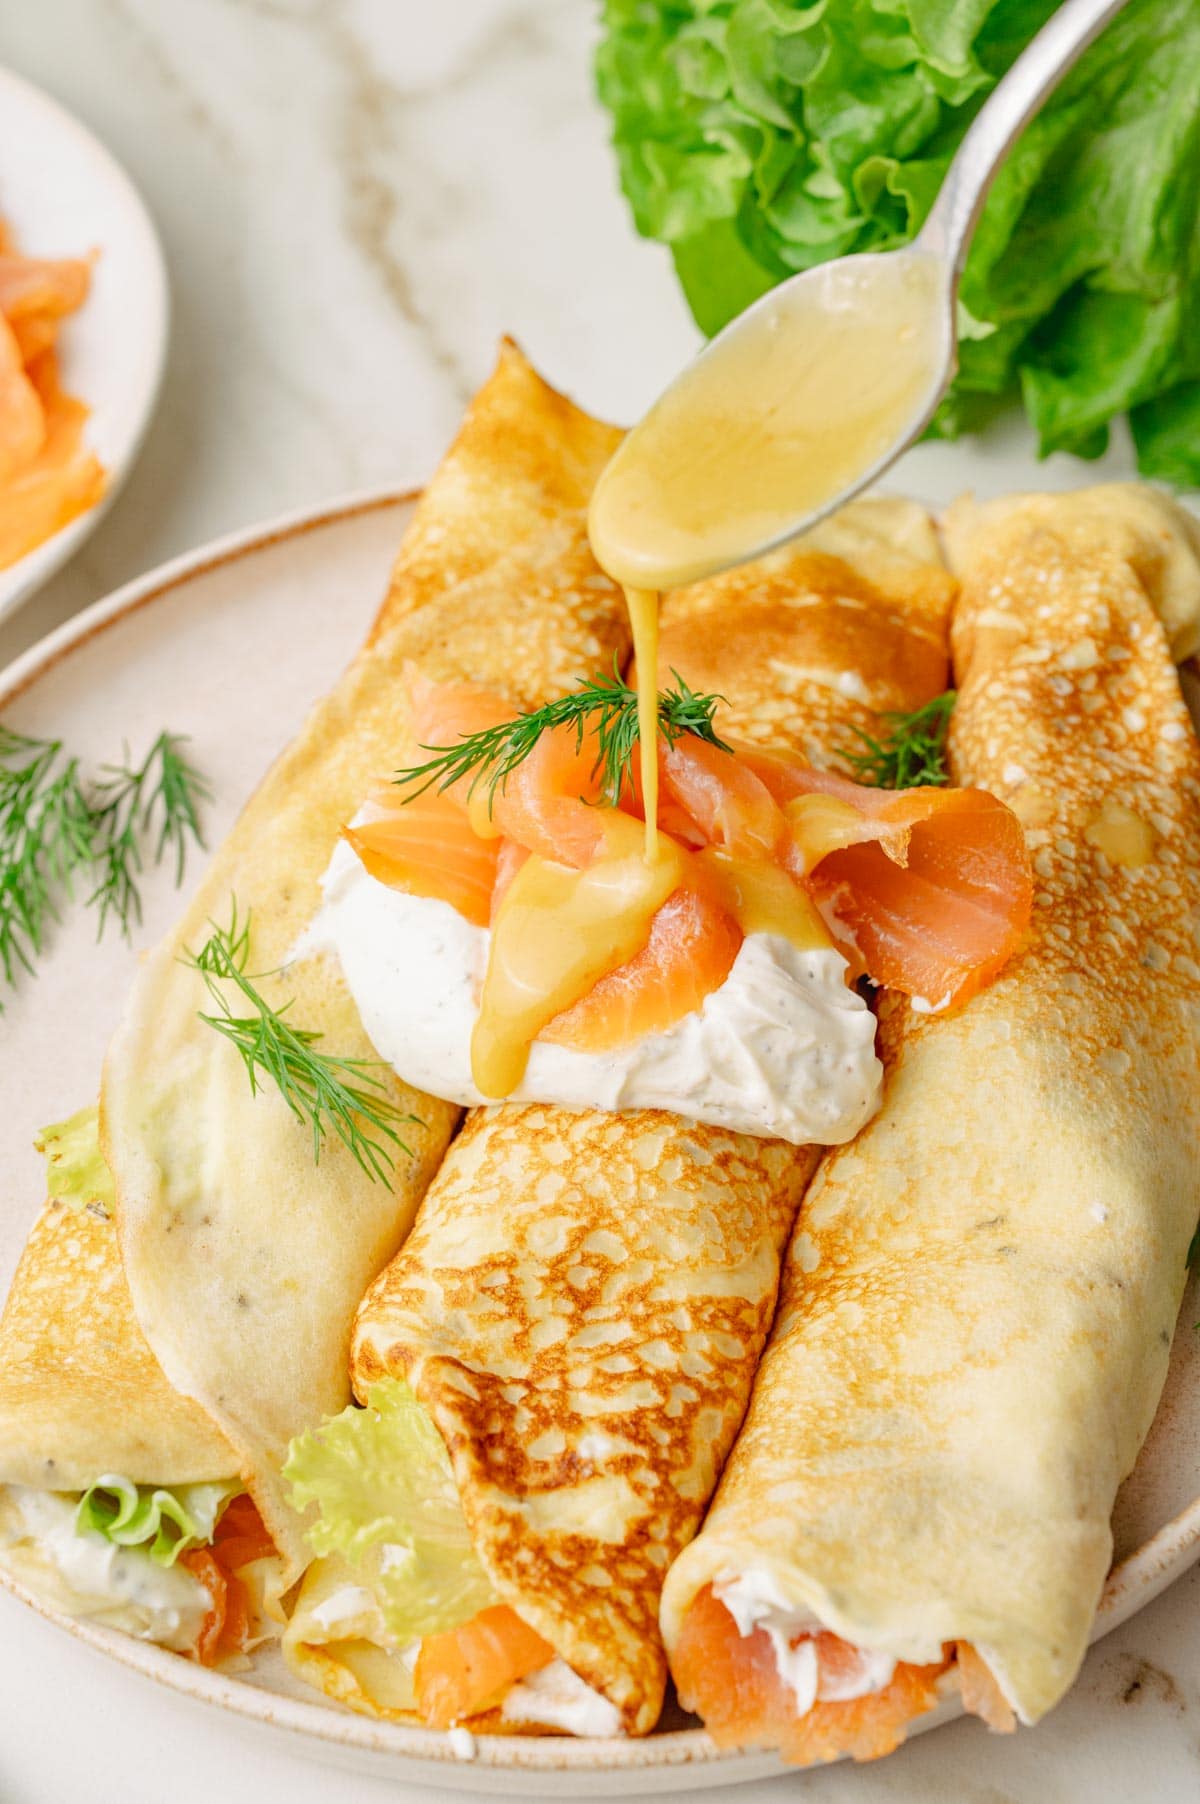 Honey mustard sauce is being poured over smoked salmon crepes on a beige plate.